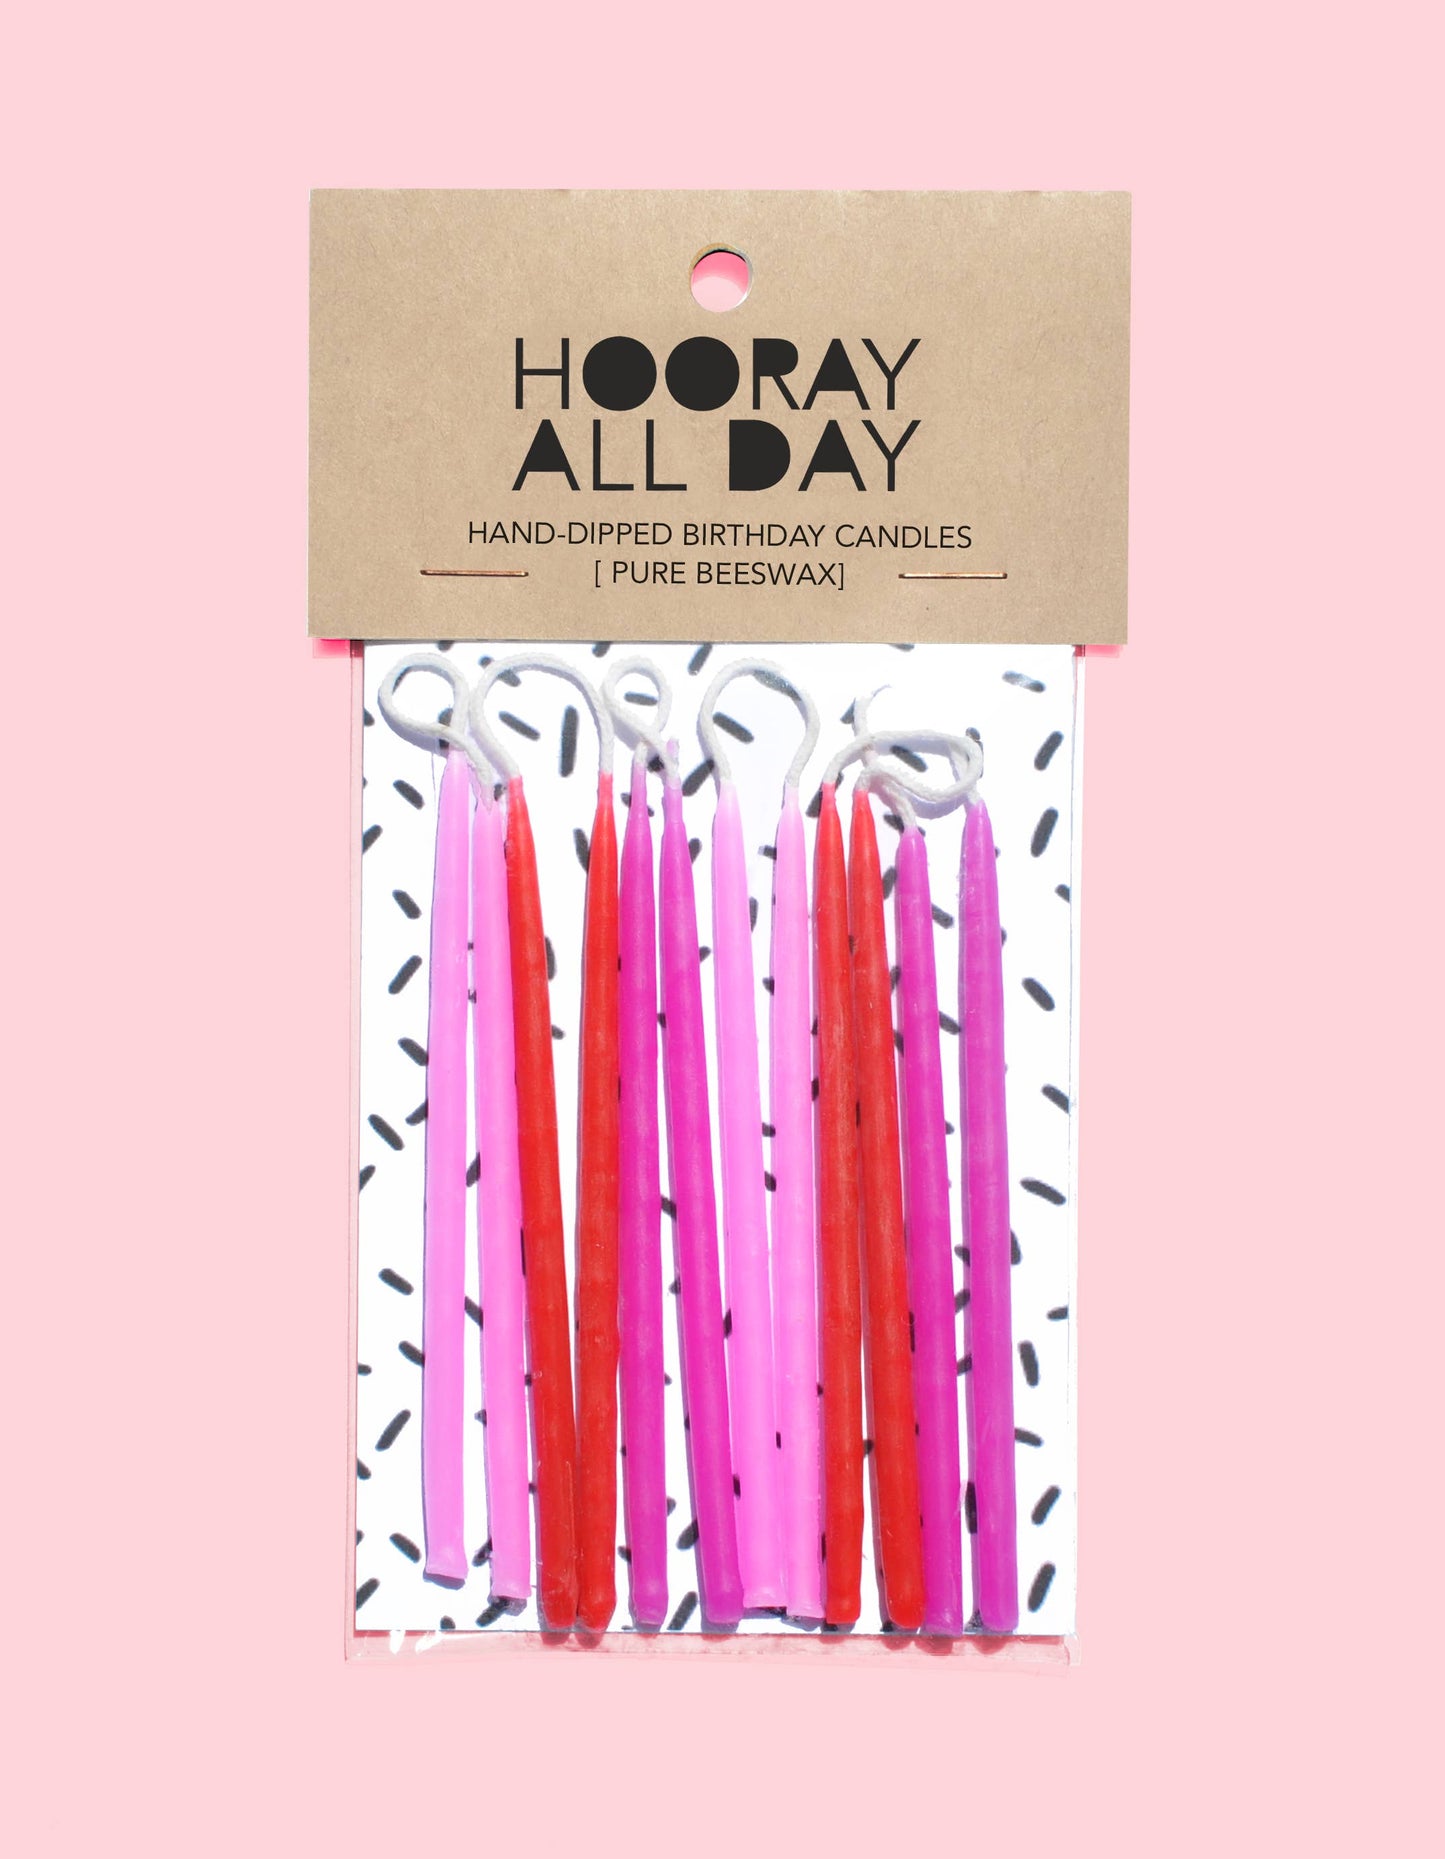 100% Beeswax Hand-Dipped Birthday Candles - Pink